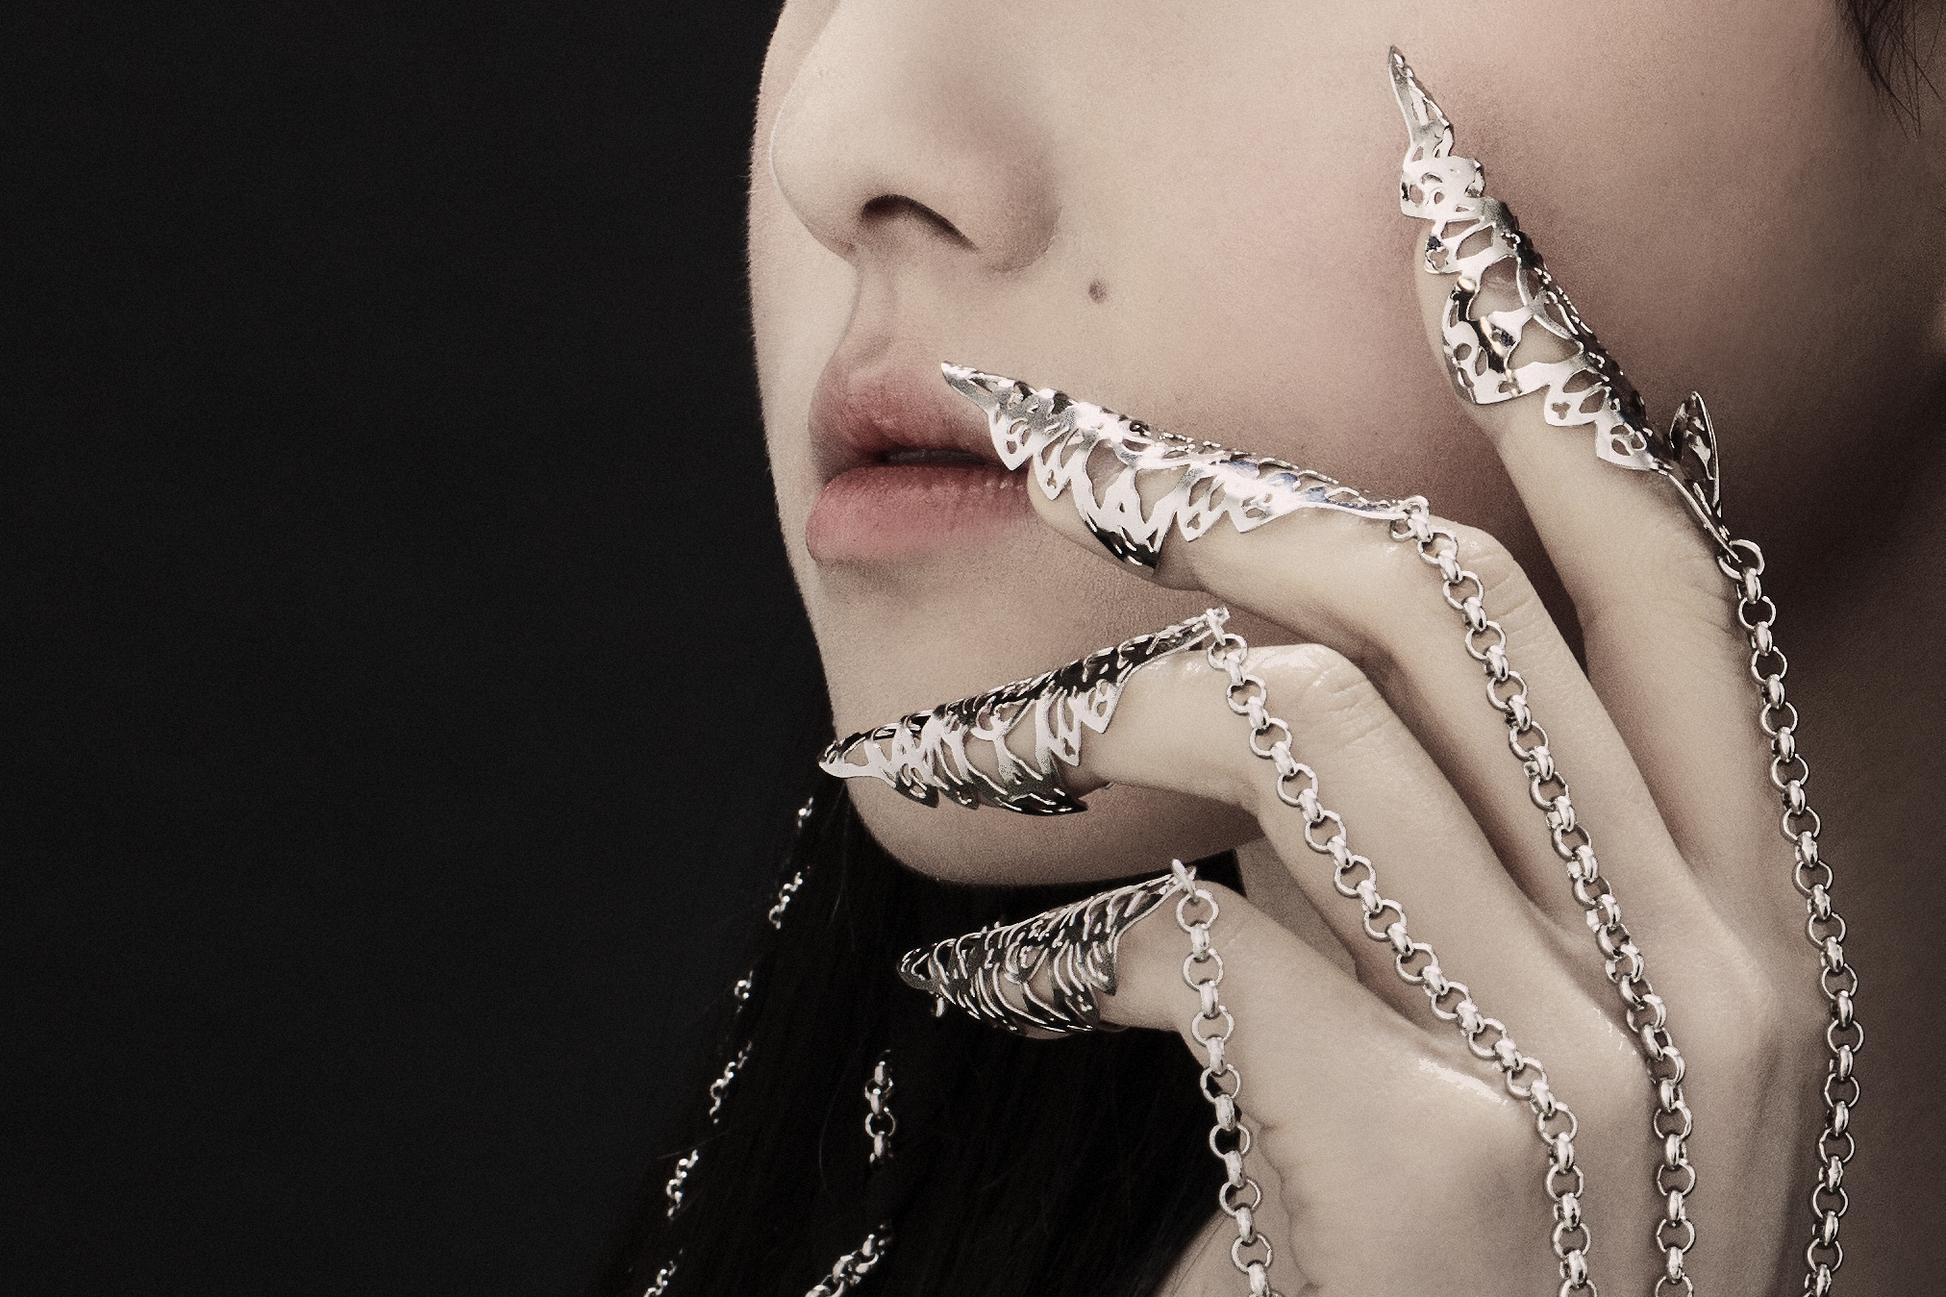 A captivating hand chain bracelet with nail claws from Myril Jewels, blending gothic allure and avant-garde design. This bold jewelry piece is perfect for those embracing a dark, whimsigoth aesthetic, ideal for adding a neo-gothic touch to any Halloween or festival outfit, or as a unique goth girlfriend gift